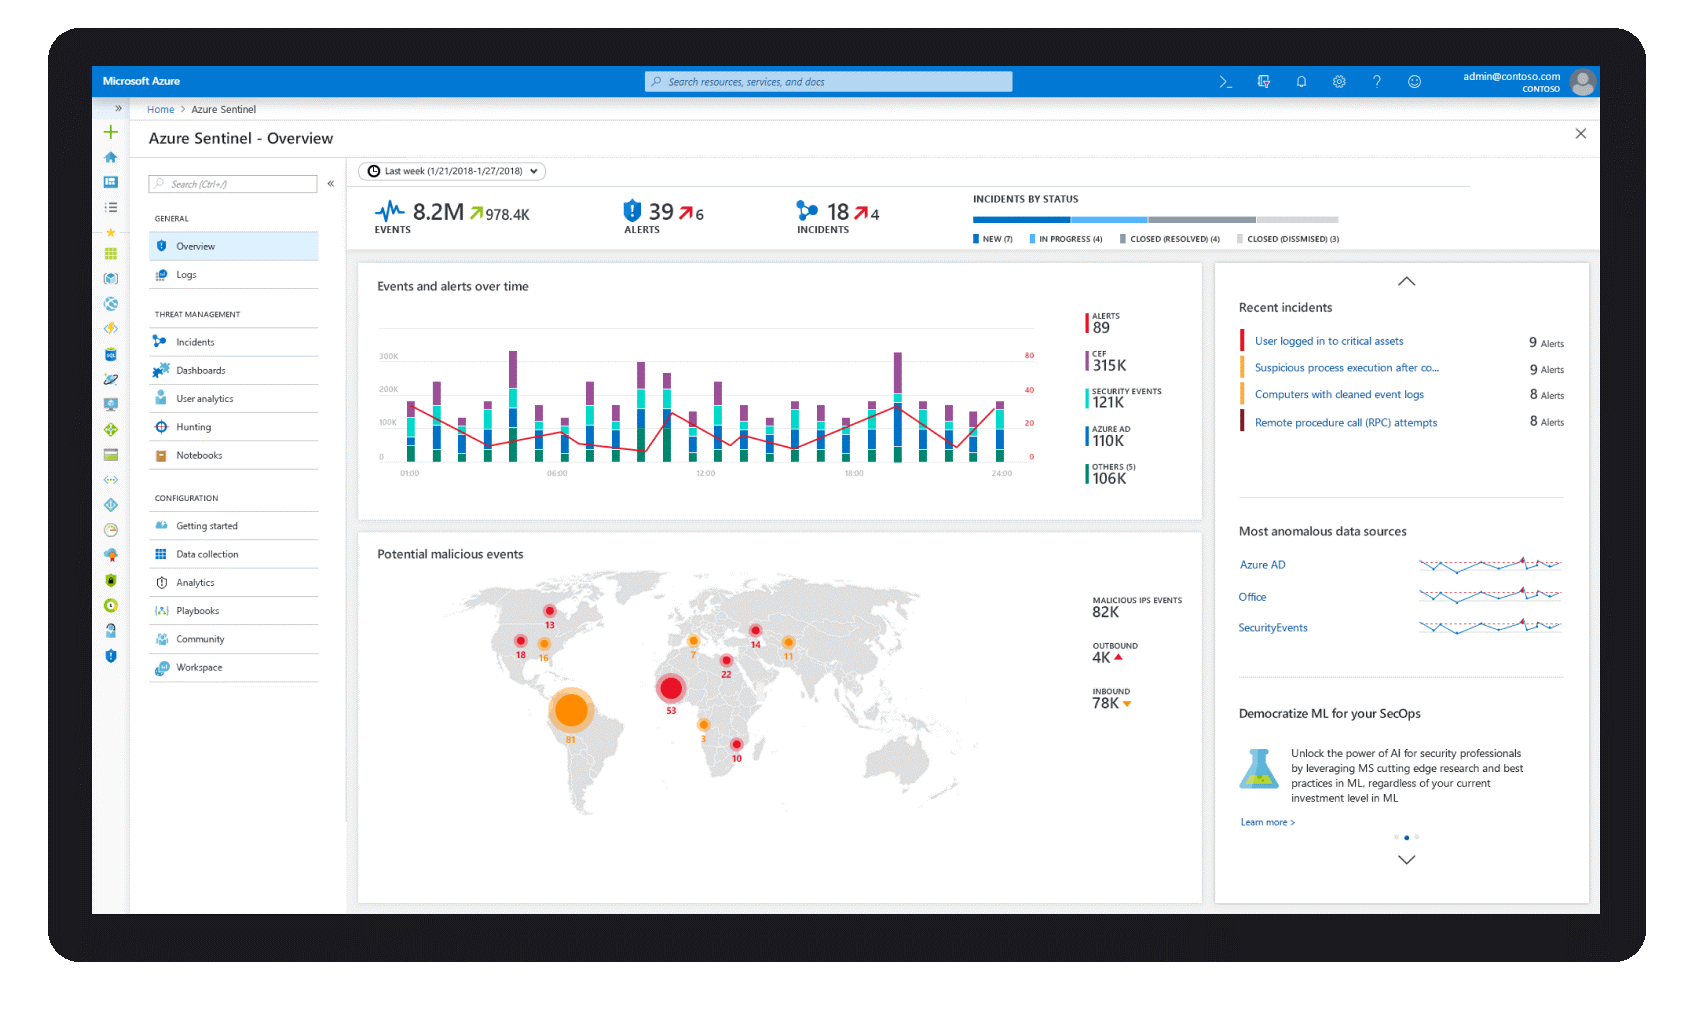 : Azure Sentinel makes it easy to collect security data across your entire hybrid organization from devices, to users, to apps, to servers on any cloud.An image showing how 